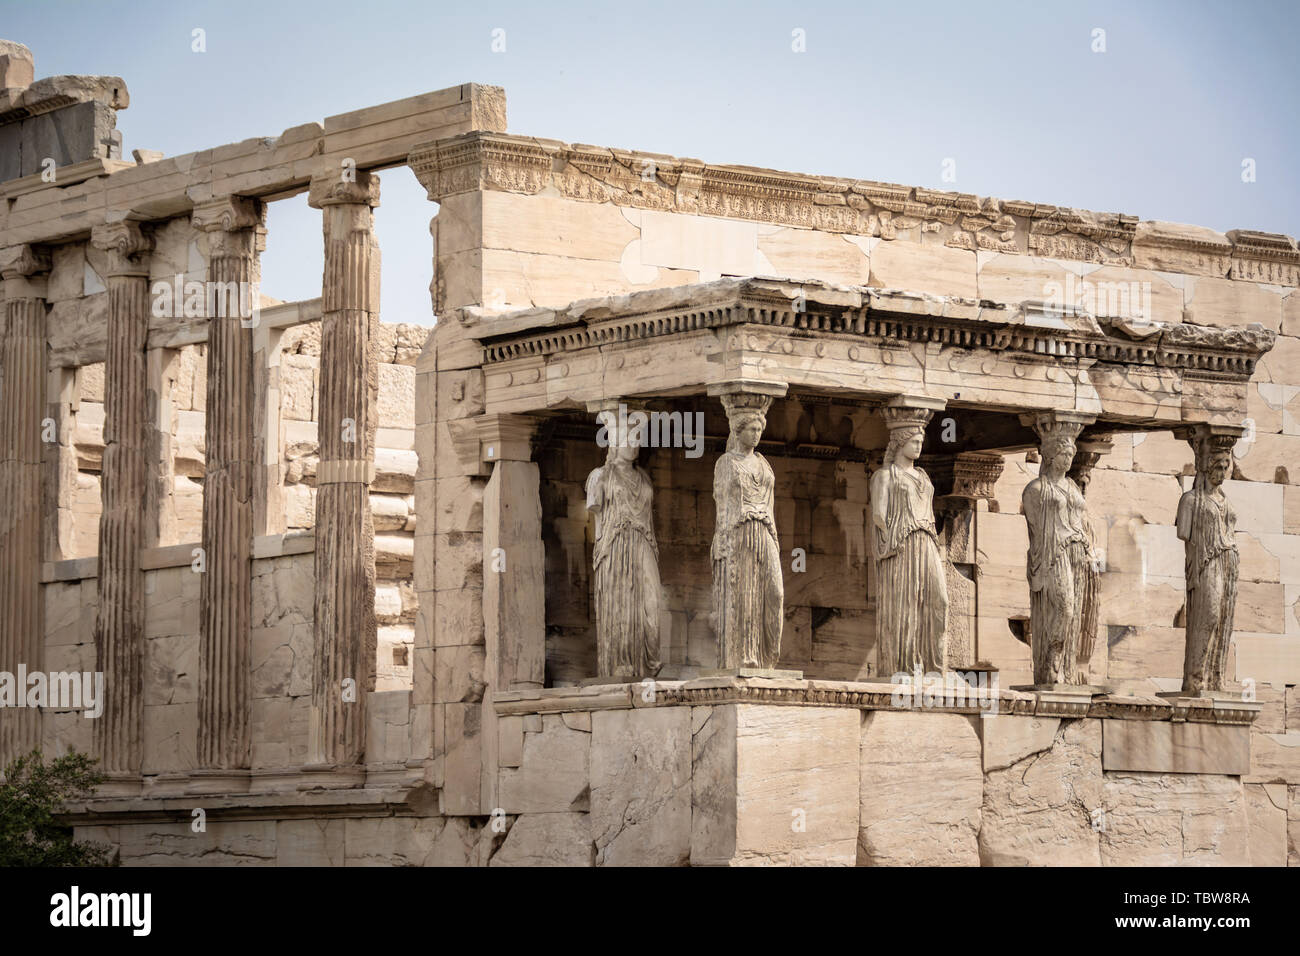 temples ruins of Ancient Greece civilization Stock Photo